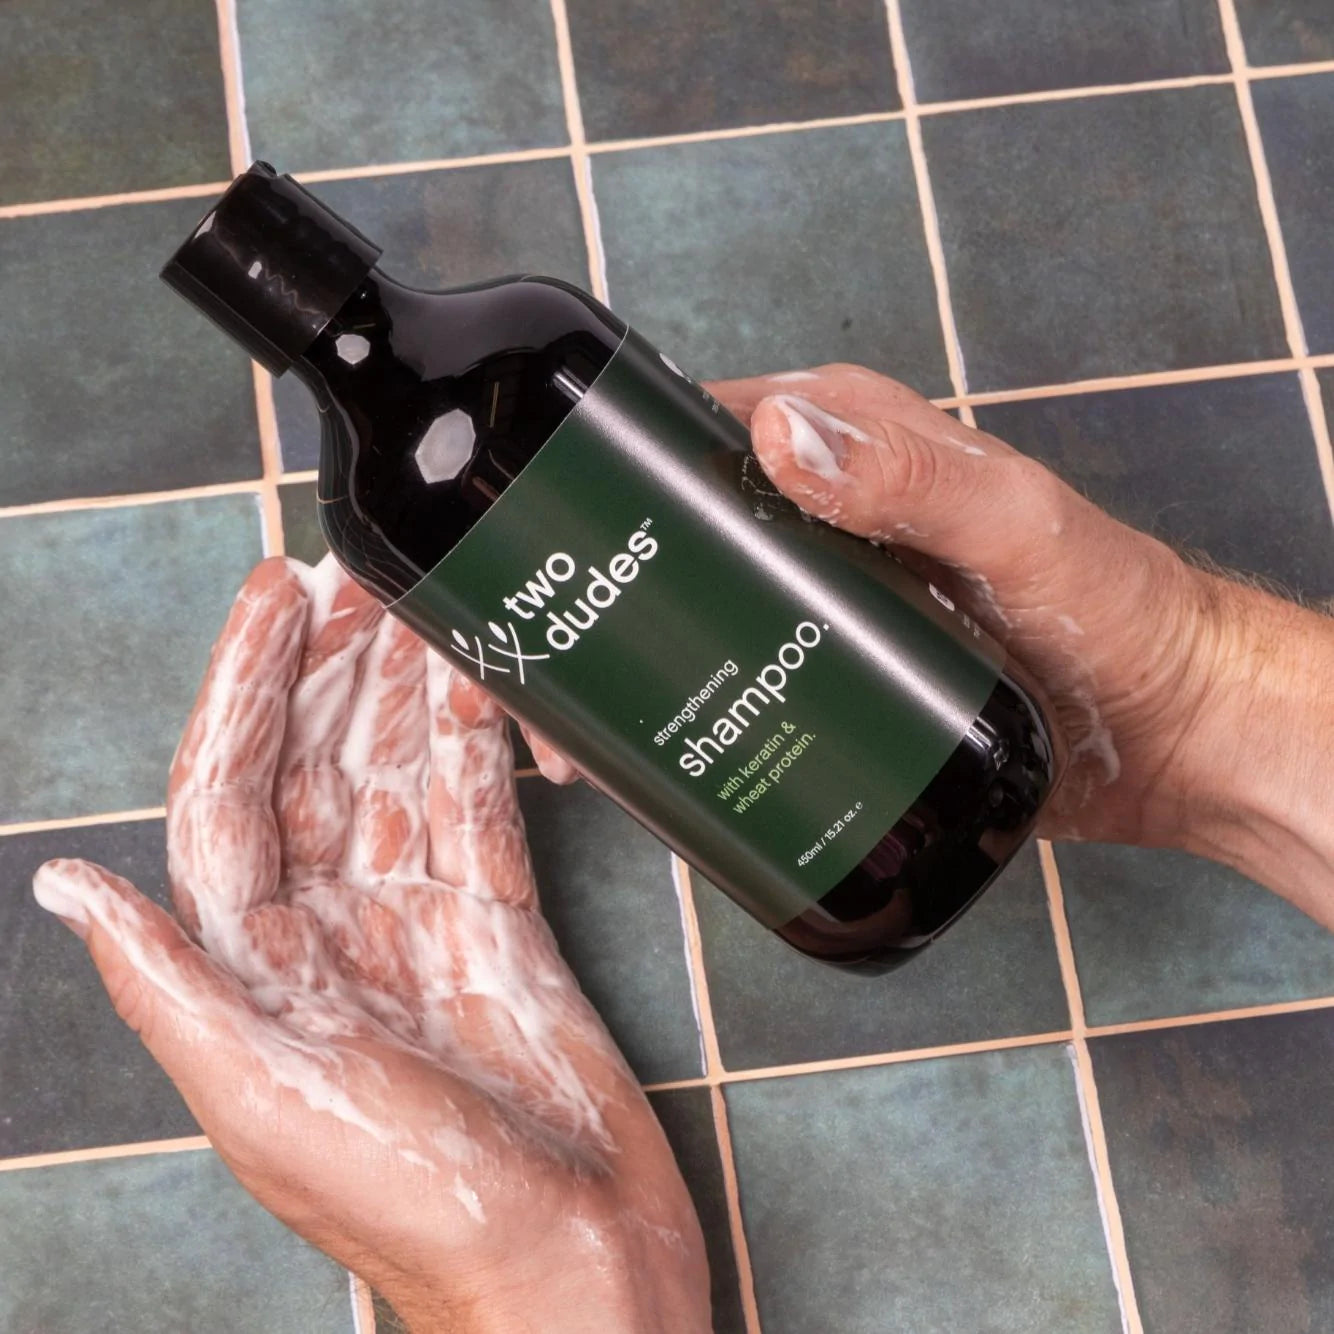 A person holding a black bottle of Two Dudes hair growth shampoo above their foamy, soaped hands, with a tiled surface in the background.